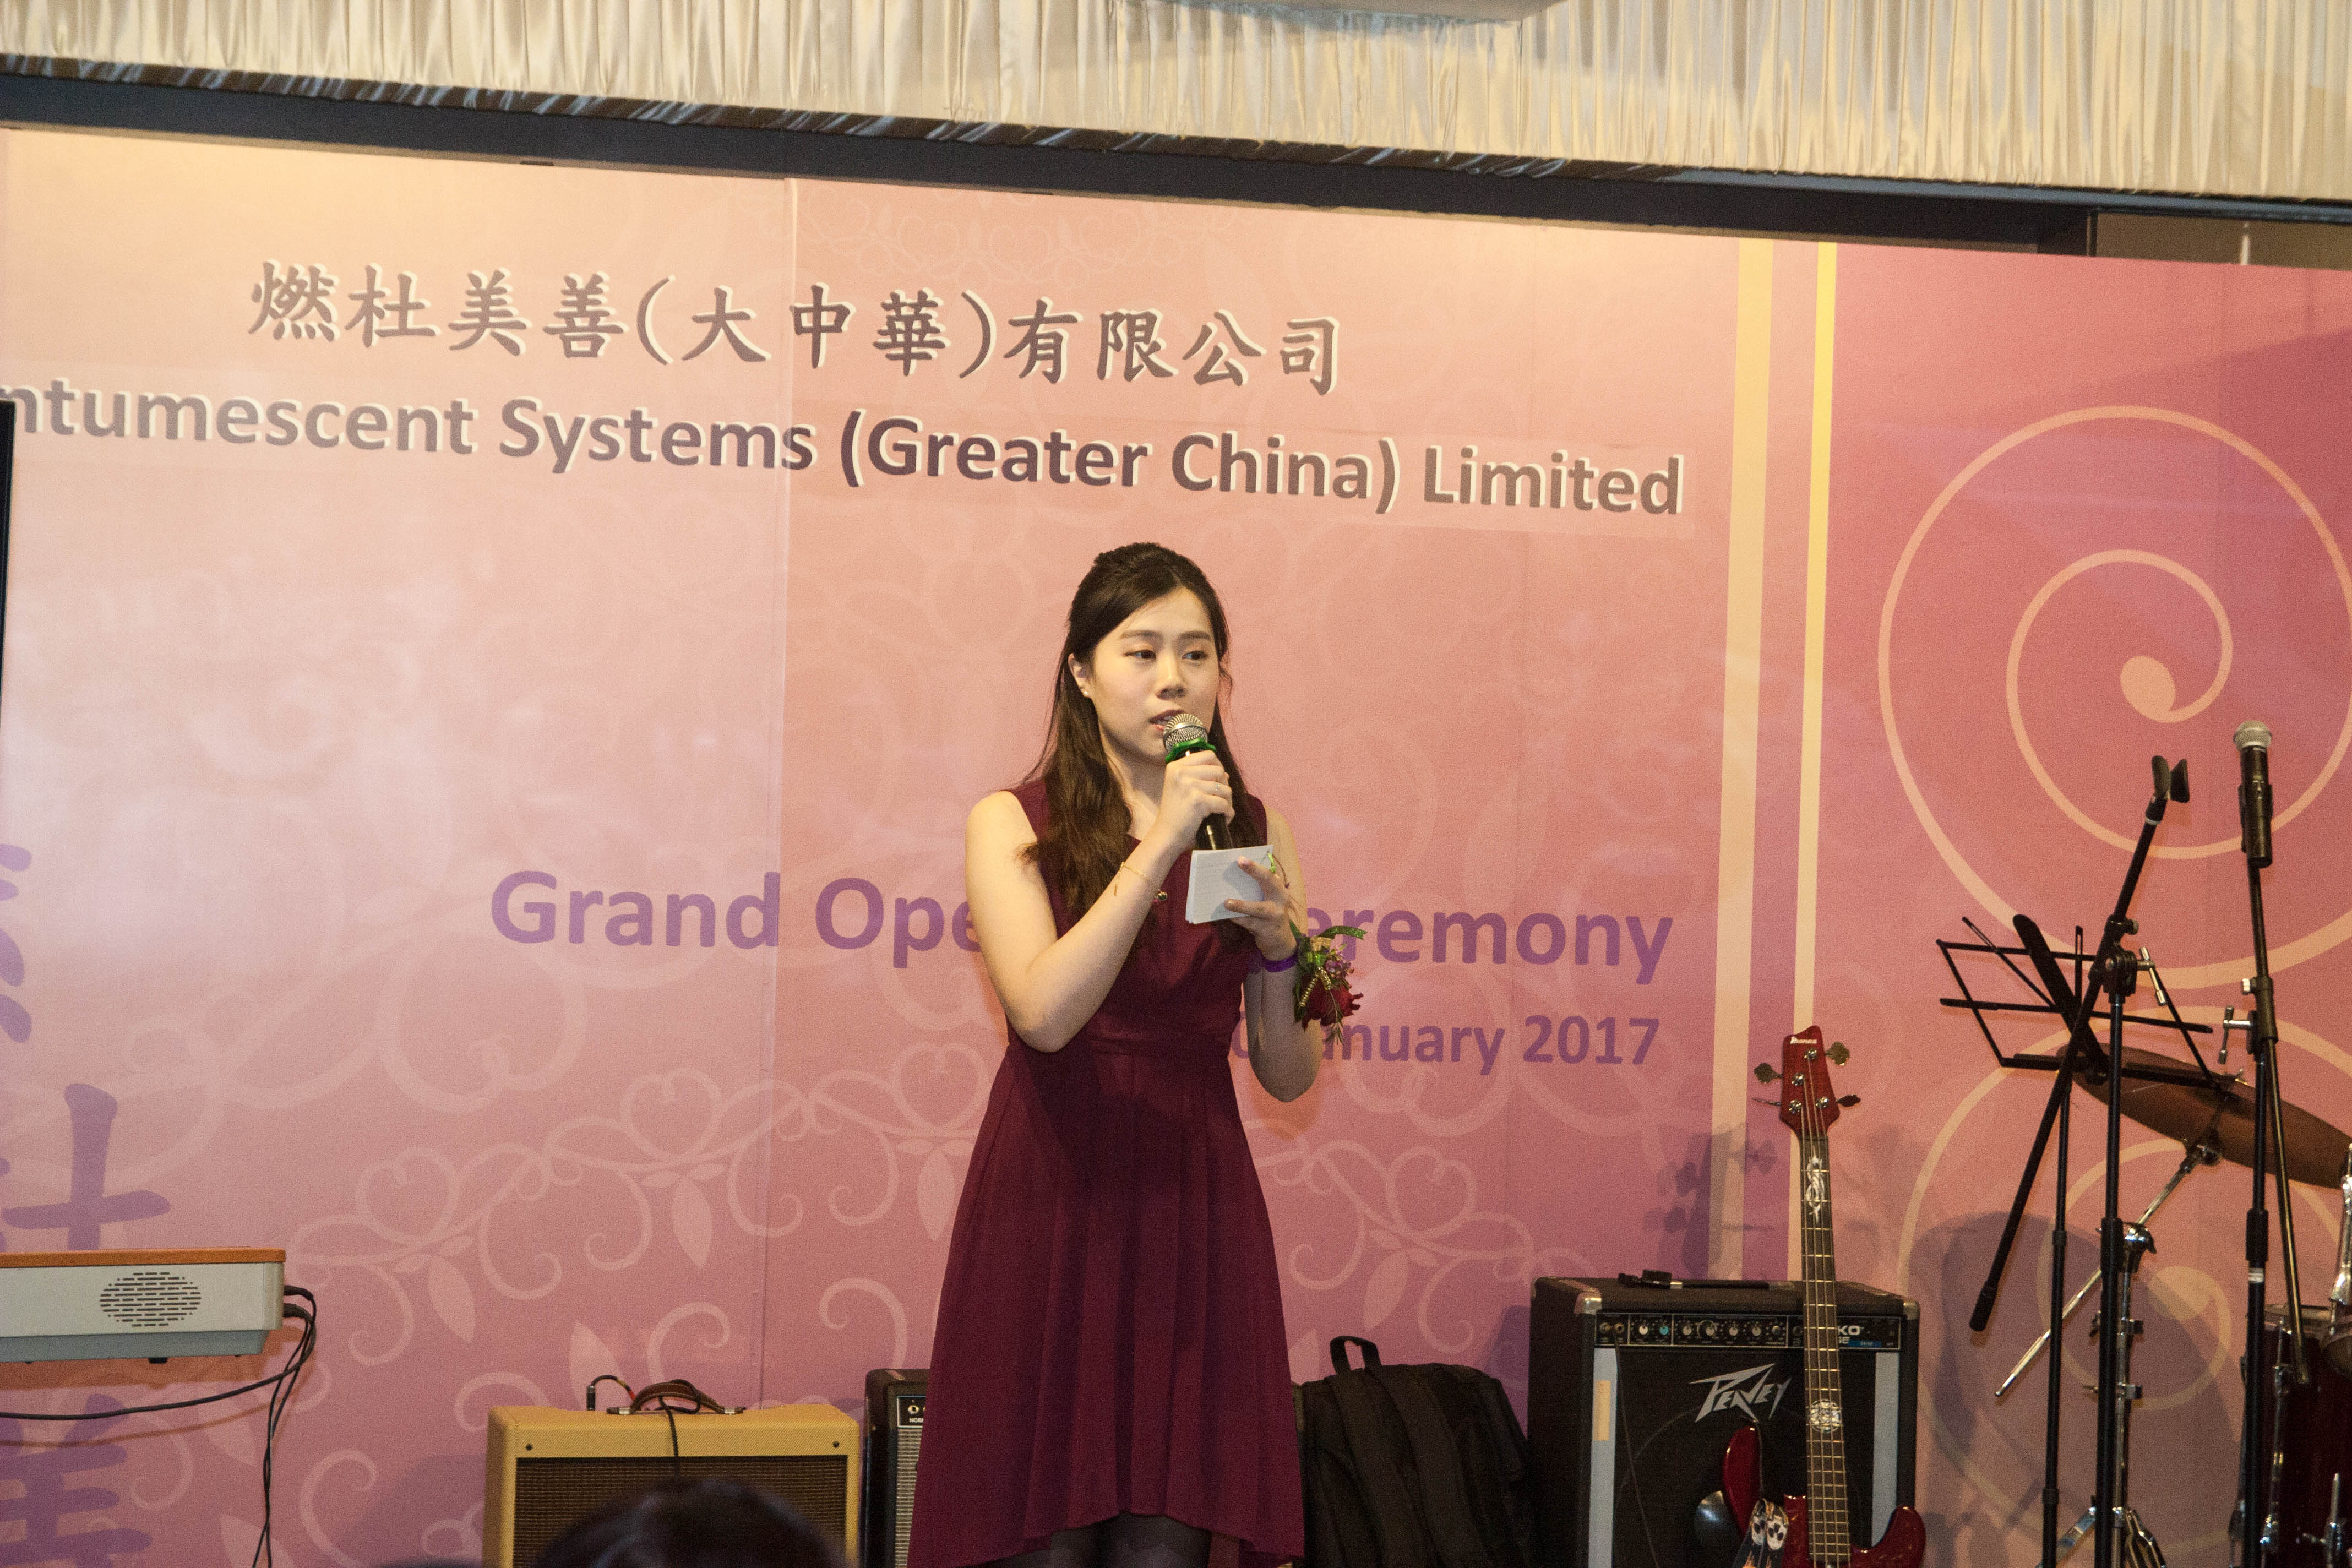 Angela Wu司儀工作紀錄: Grand Opening Ceremony of Intumescent Systems (Greater China) Ltd